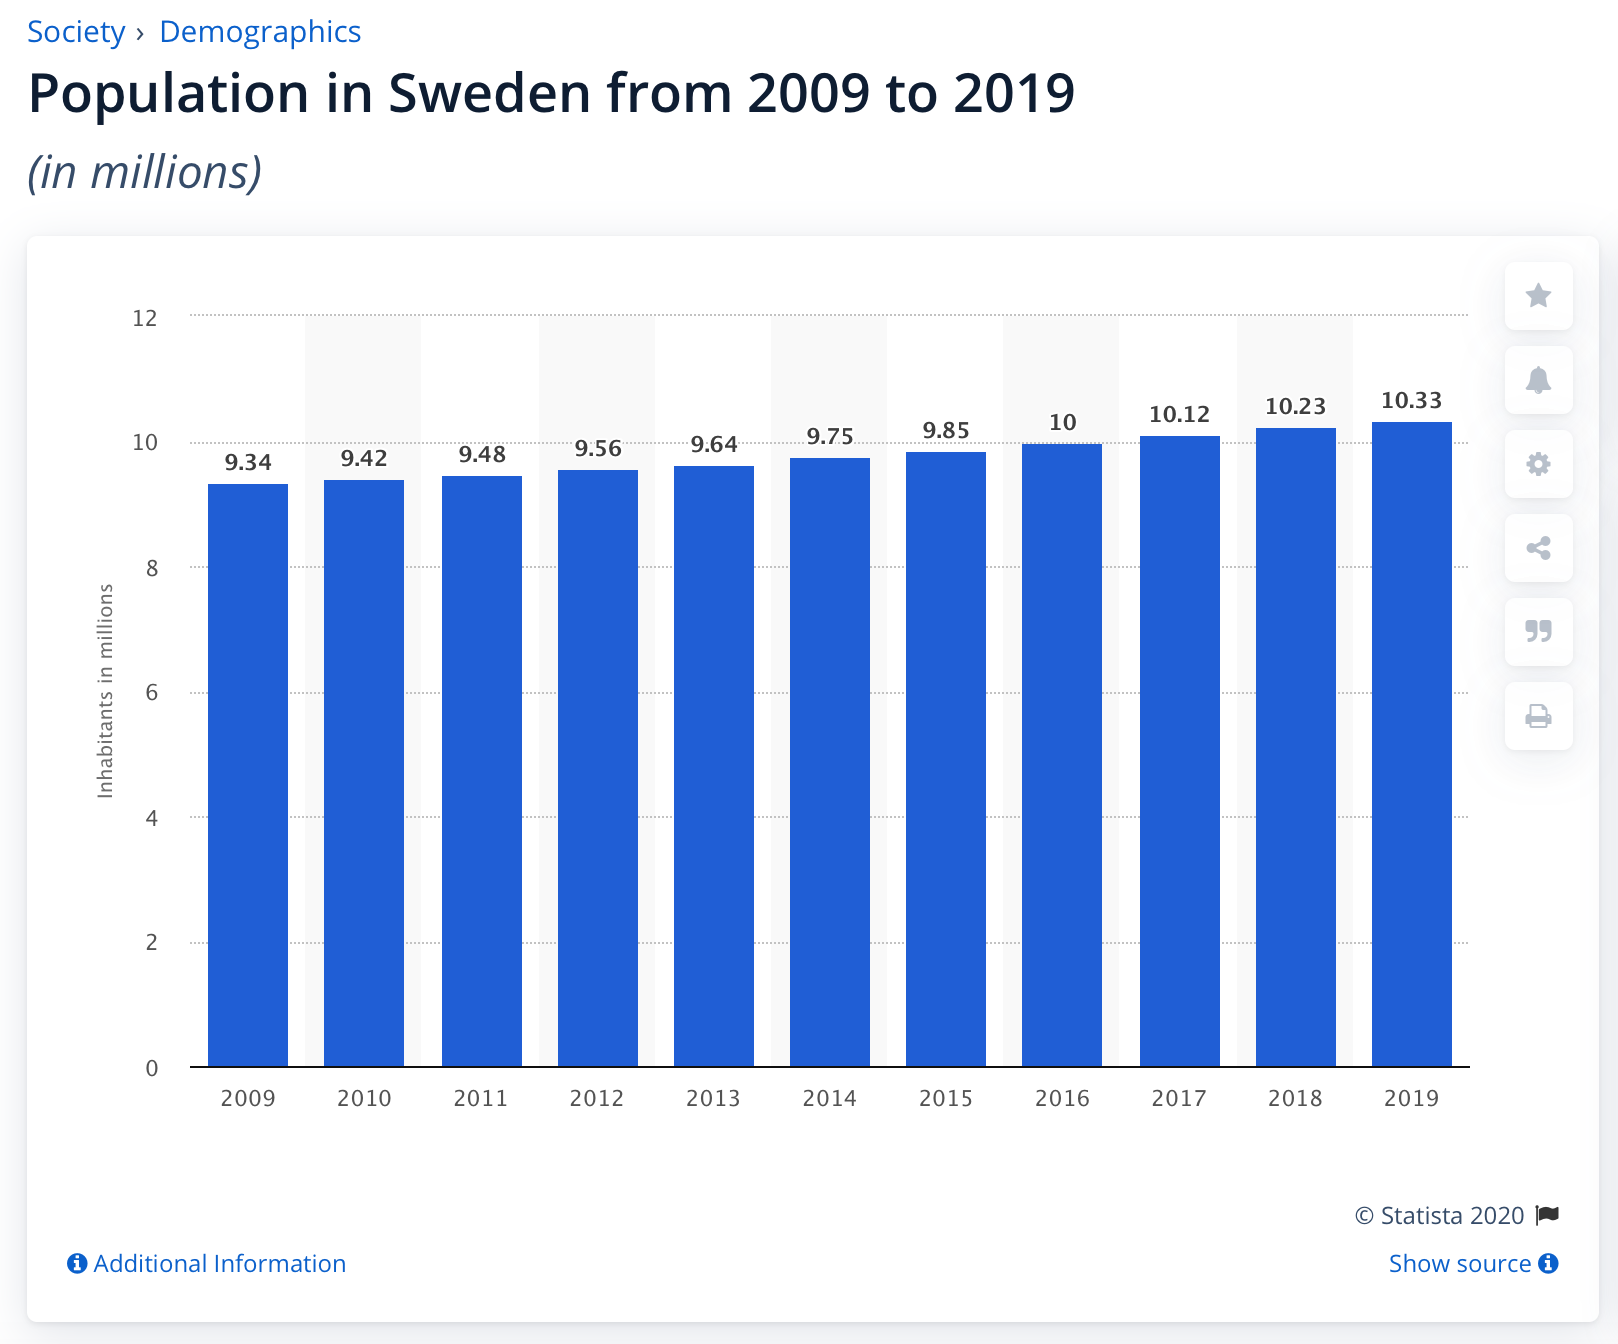 Population growth in Sweden from 2010-2019